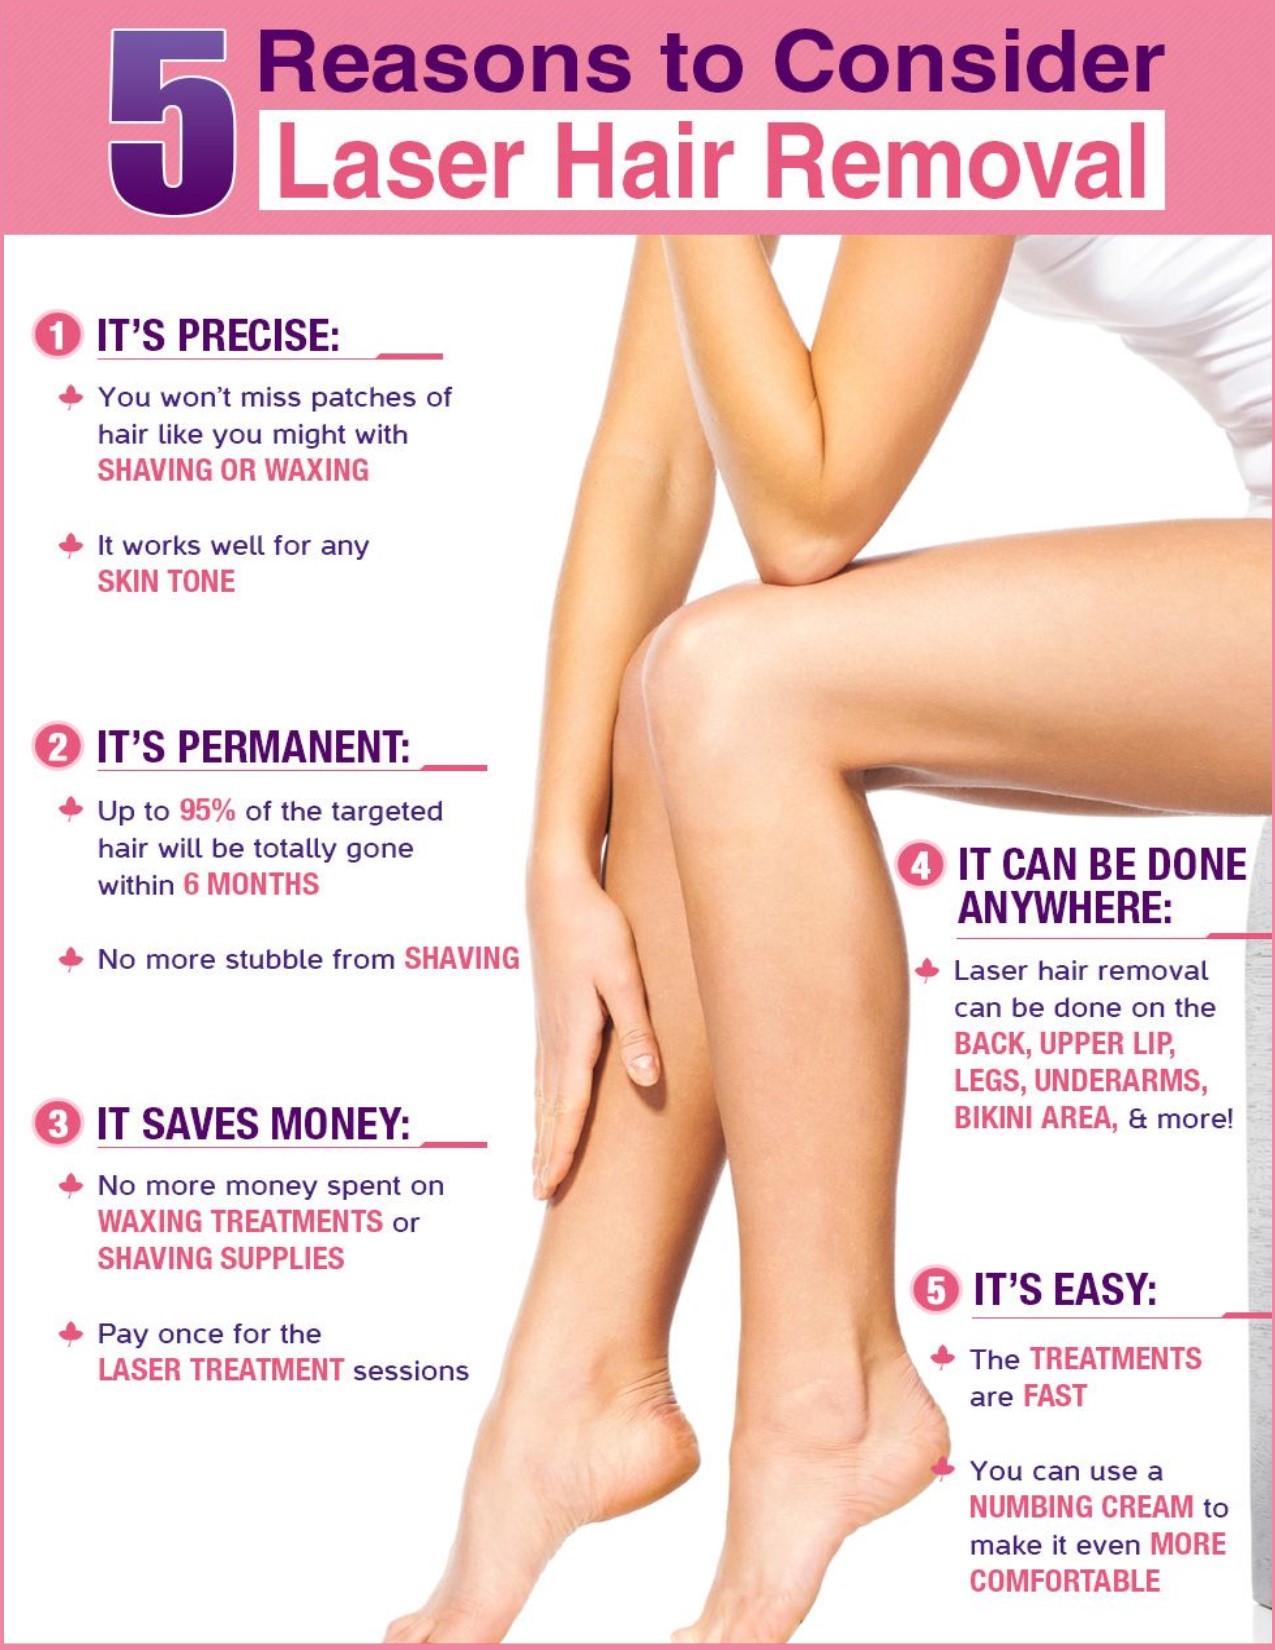 5 Reasons to Consider Laser Hair Removal